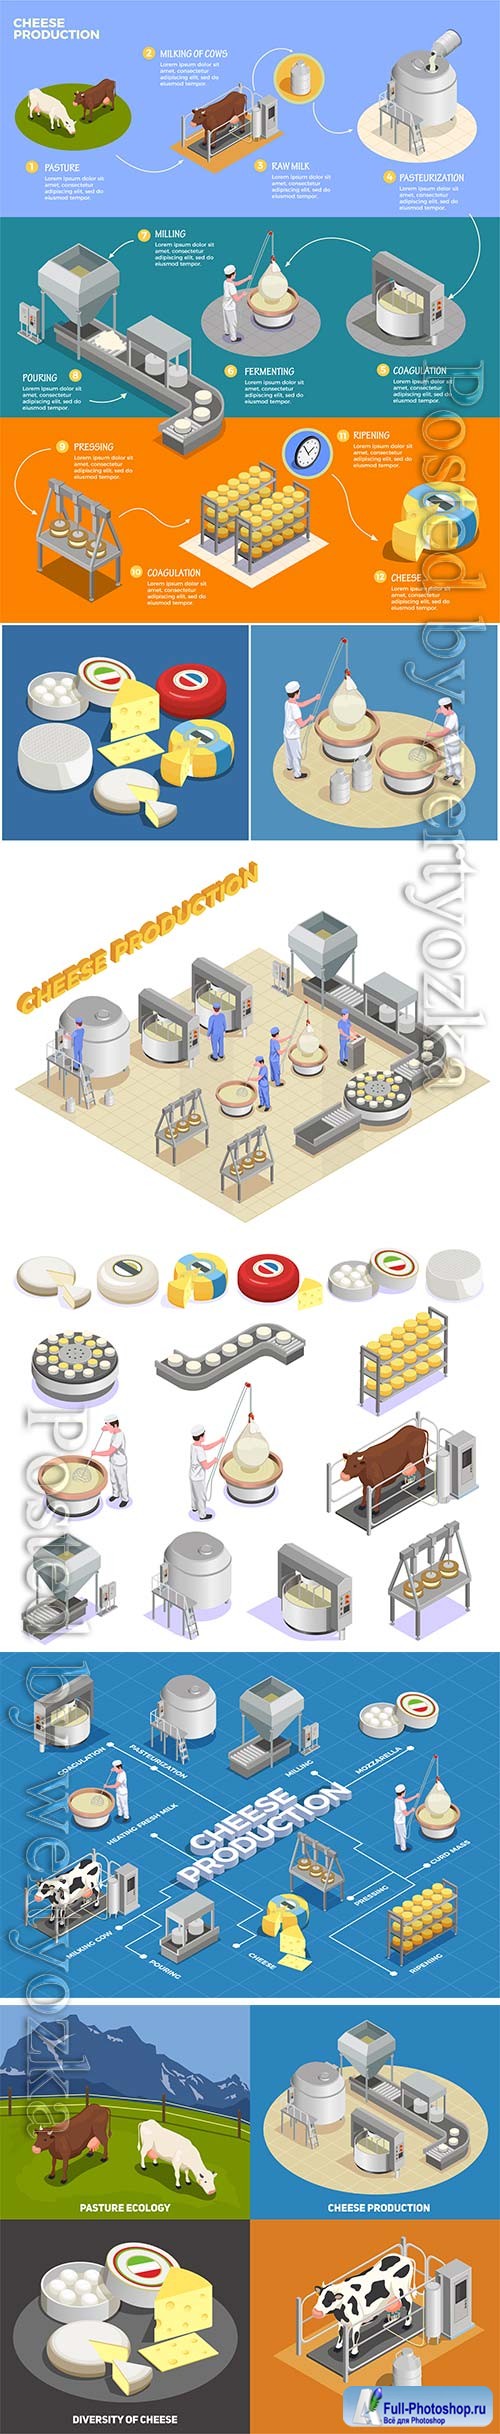 Isometric cheese production illustrates the process of milk yield